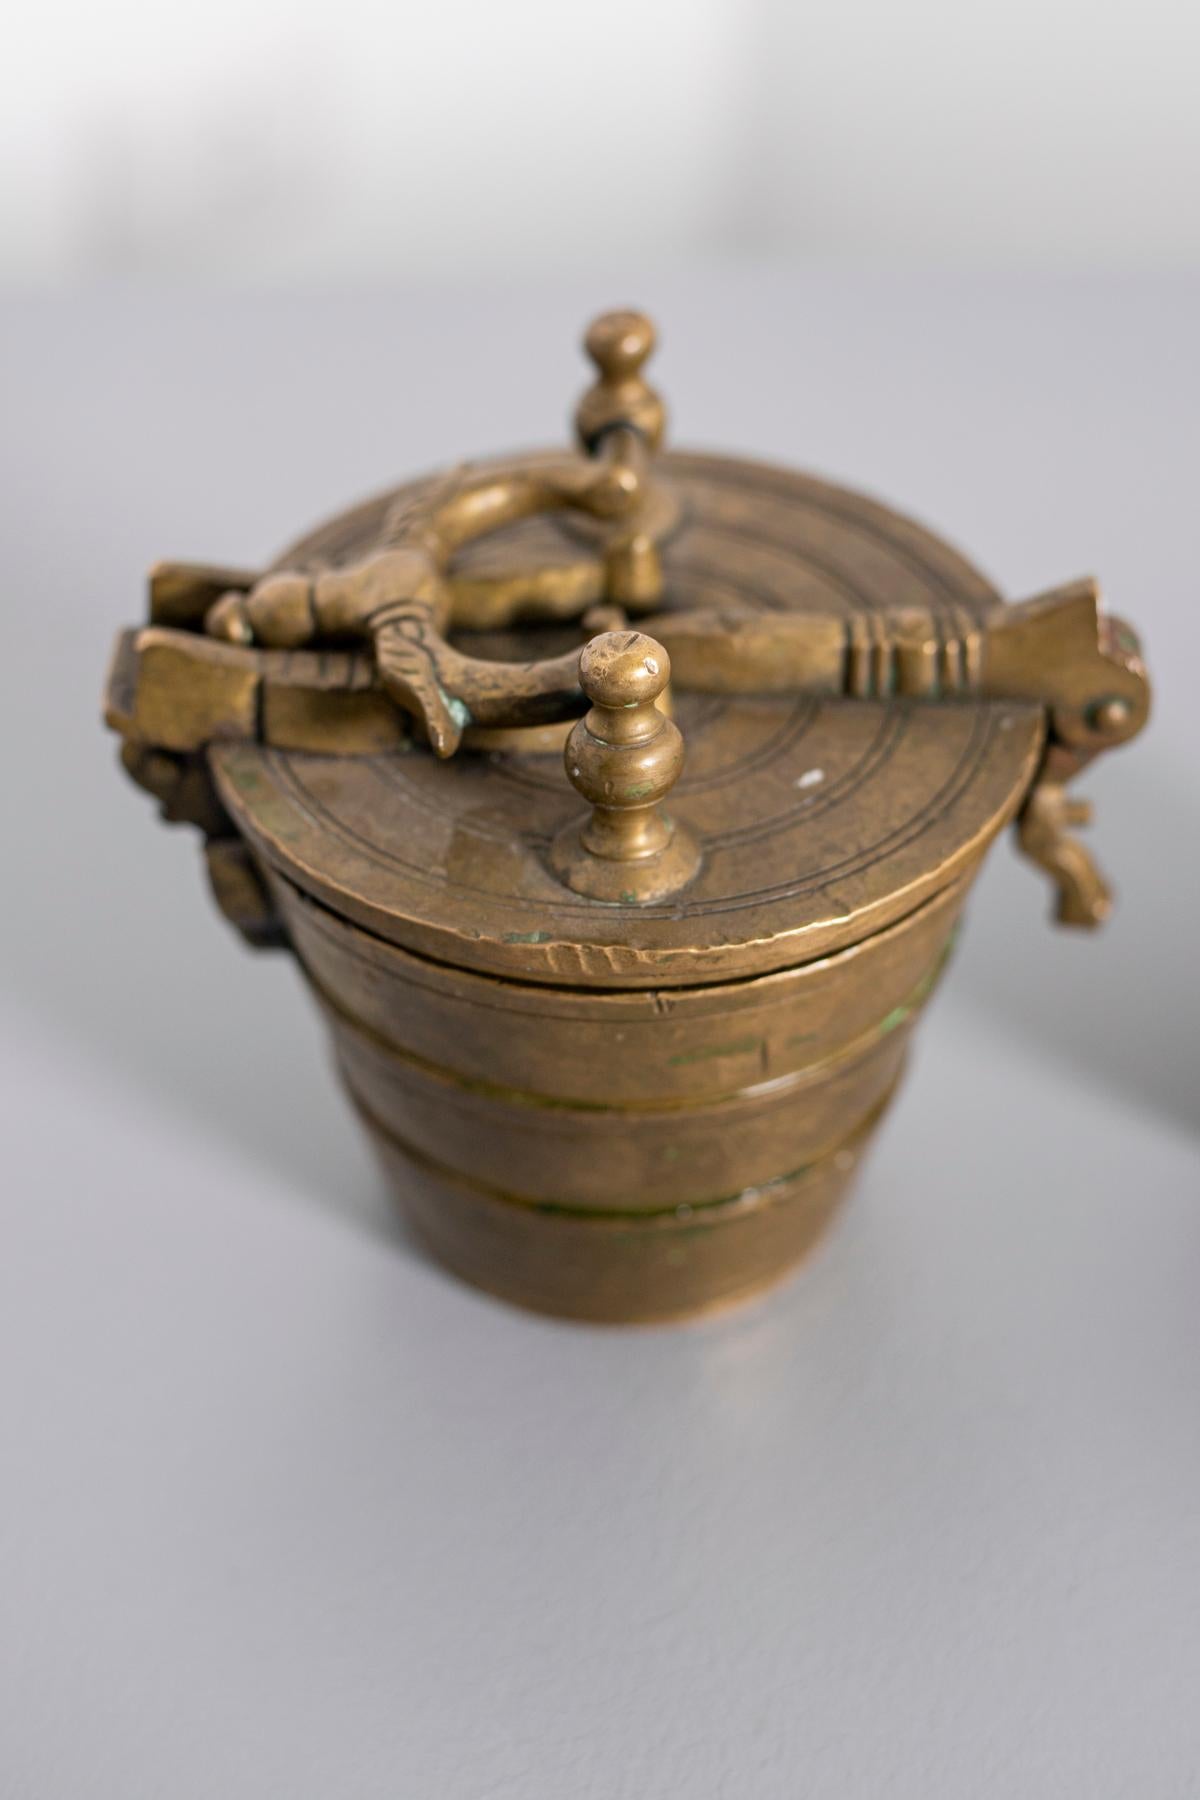 Precious bronze scale weights, the set consists of 8 pieces in the shape of a tray. The main weight acts as a container with detailed decorations at the top, the lid has a perfectly functional closure. This is a very special collector's item for